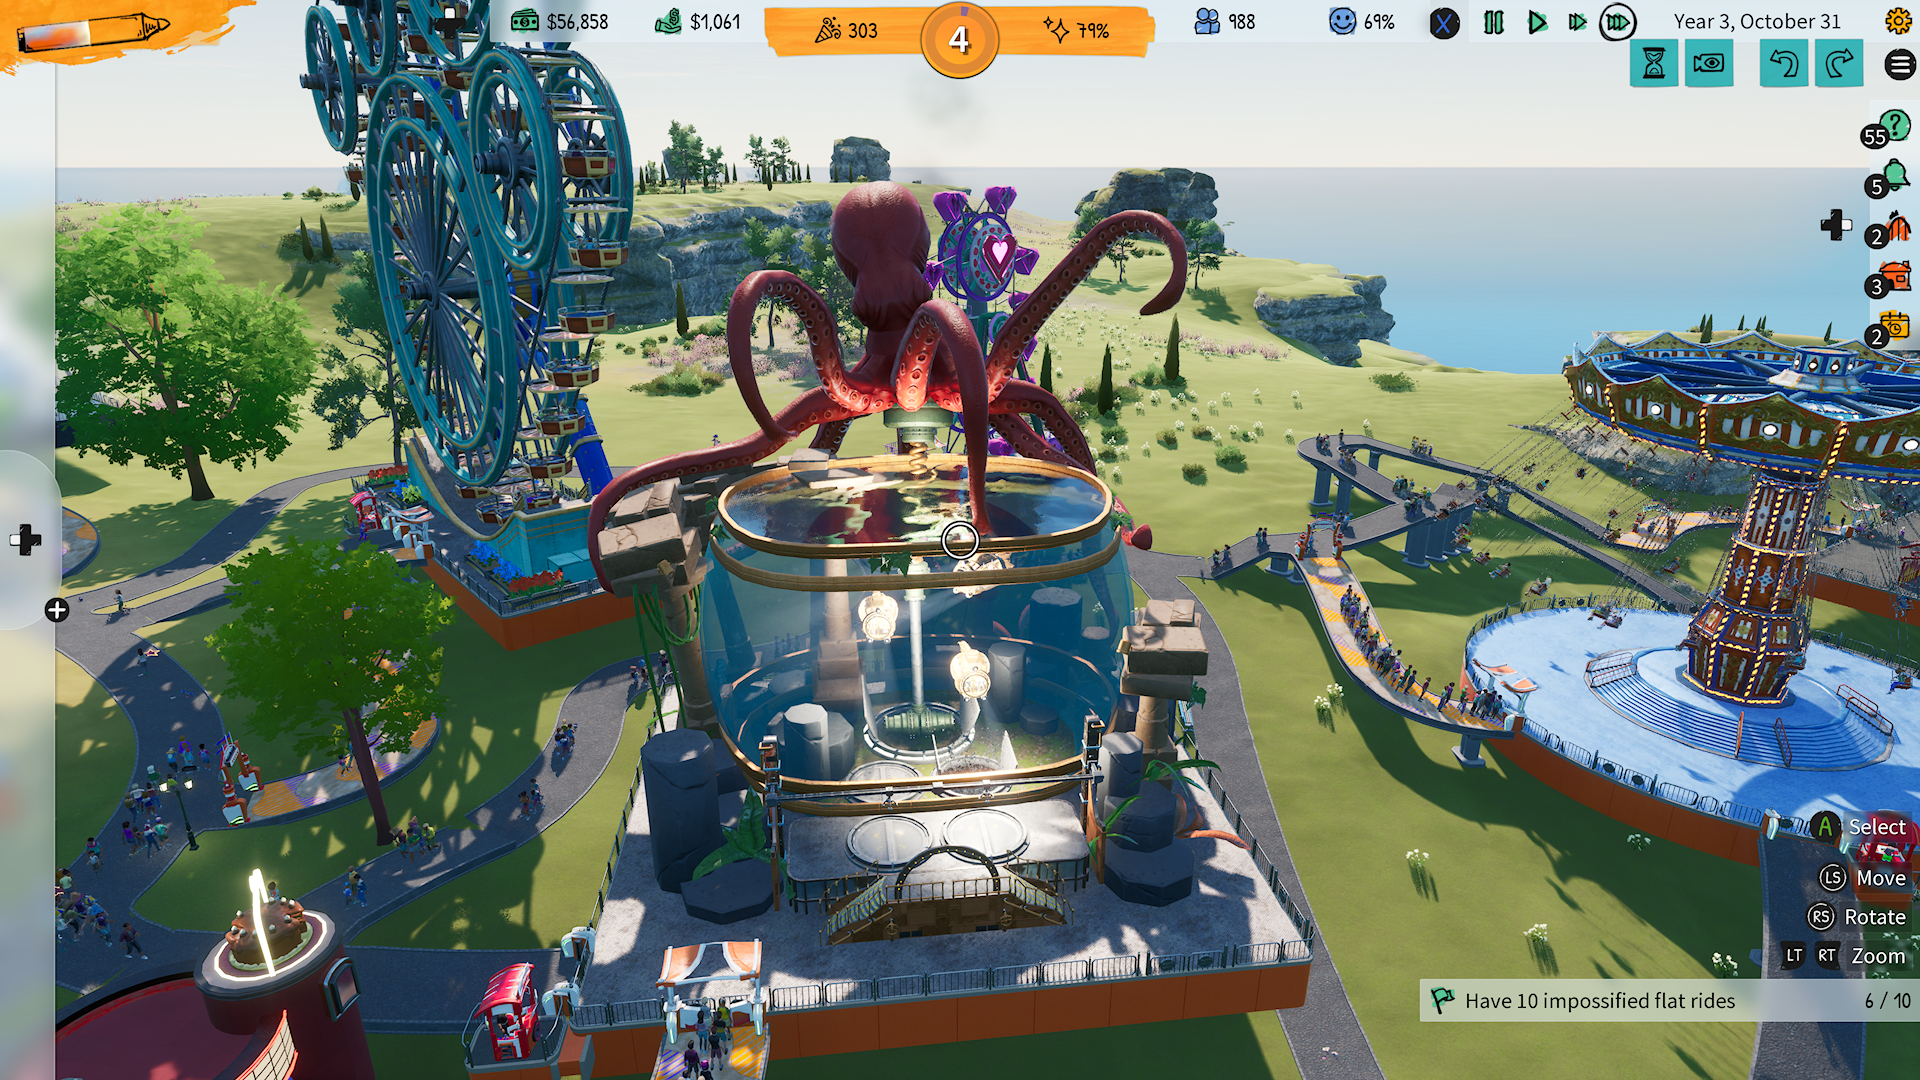 RollerCoaster Tycoon World's focus on freedom makes it exciting